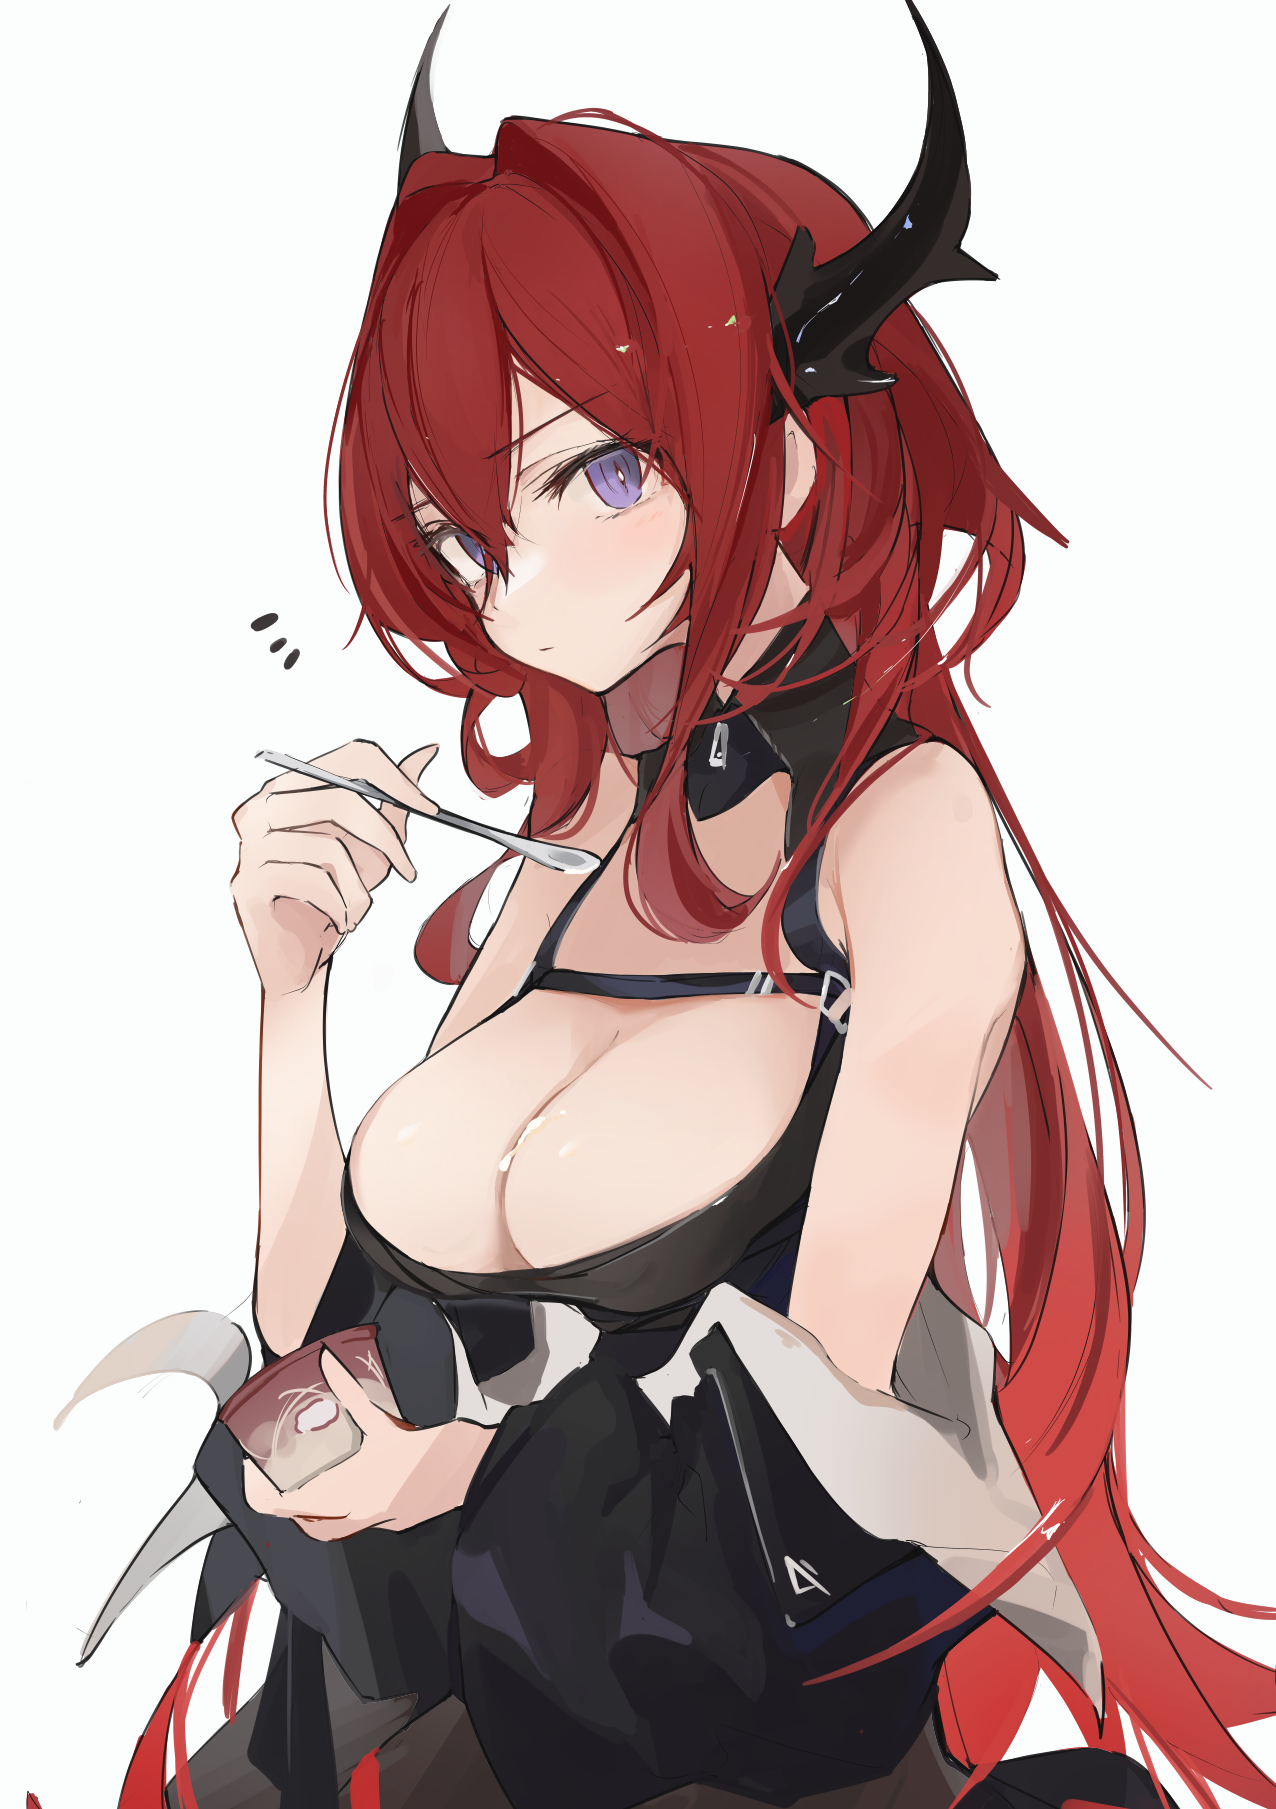 Anime 1276x1809 Arknights anime anime girls boobs big boobs redhead horns long hair curvy white background cleavage Surtr (Arknights) artwork Mikojin